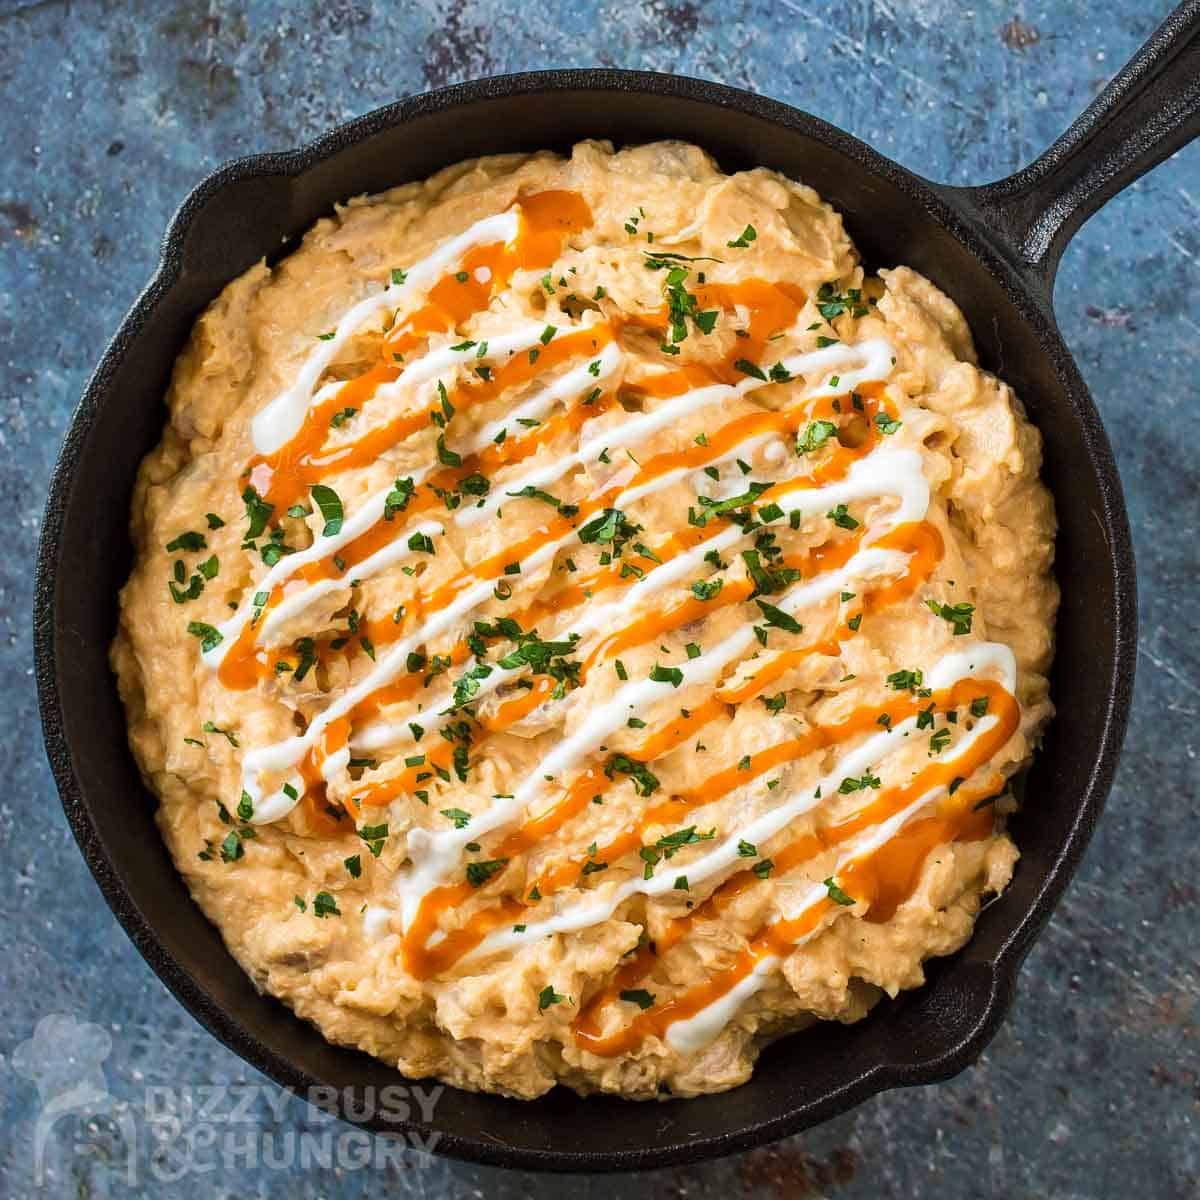 Overhead shot of buffalo chicken dip garnished with buffalo sauce, sour cream, and herbs in a cast iron skillet on a blue surface.